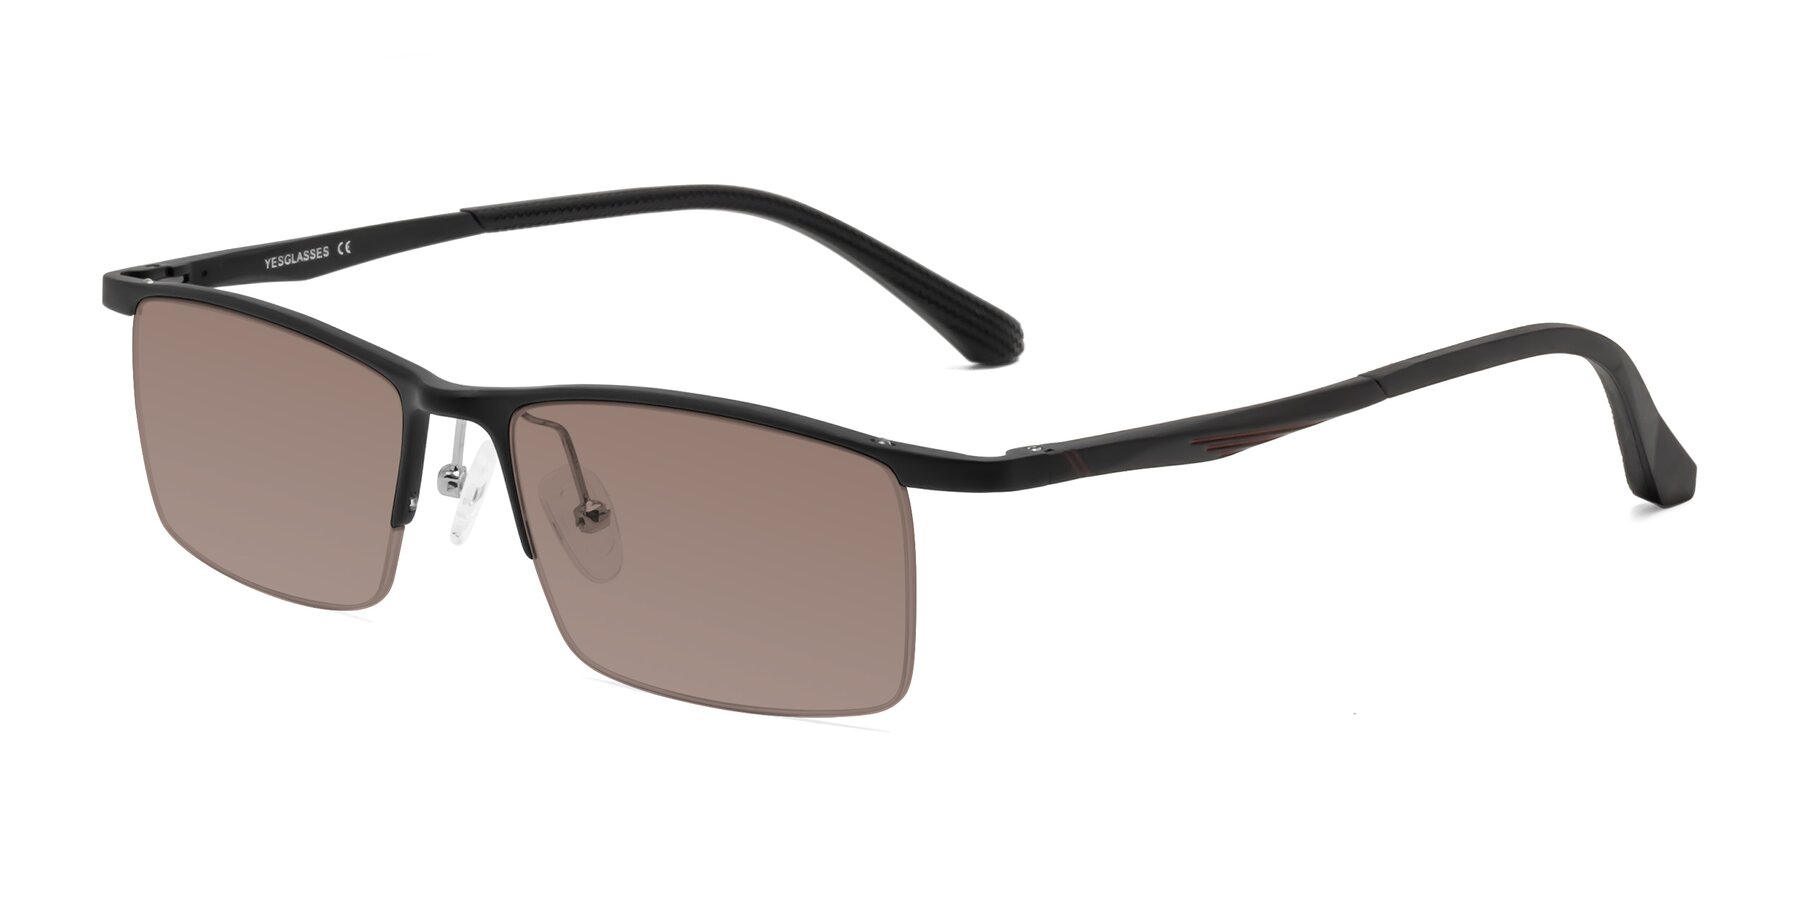 Angle of CX6236 in Black with Medium Brown Tinted Lenses